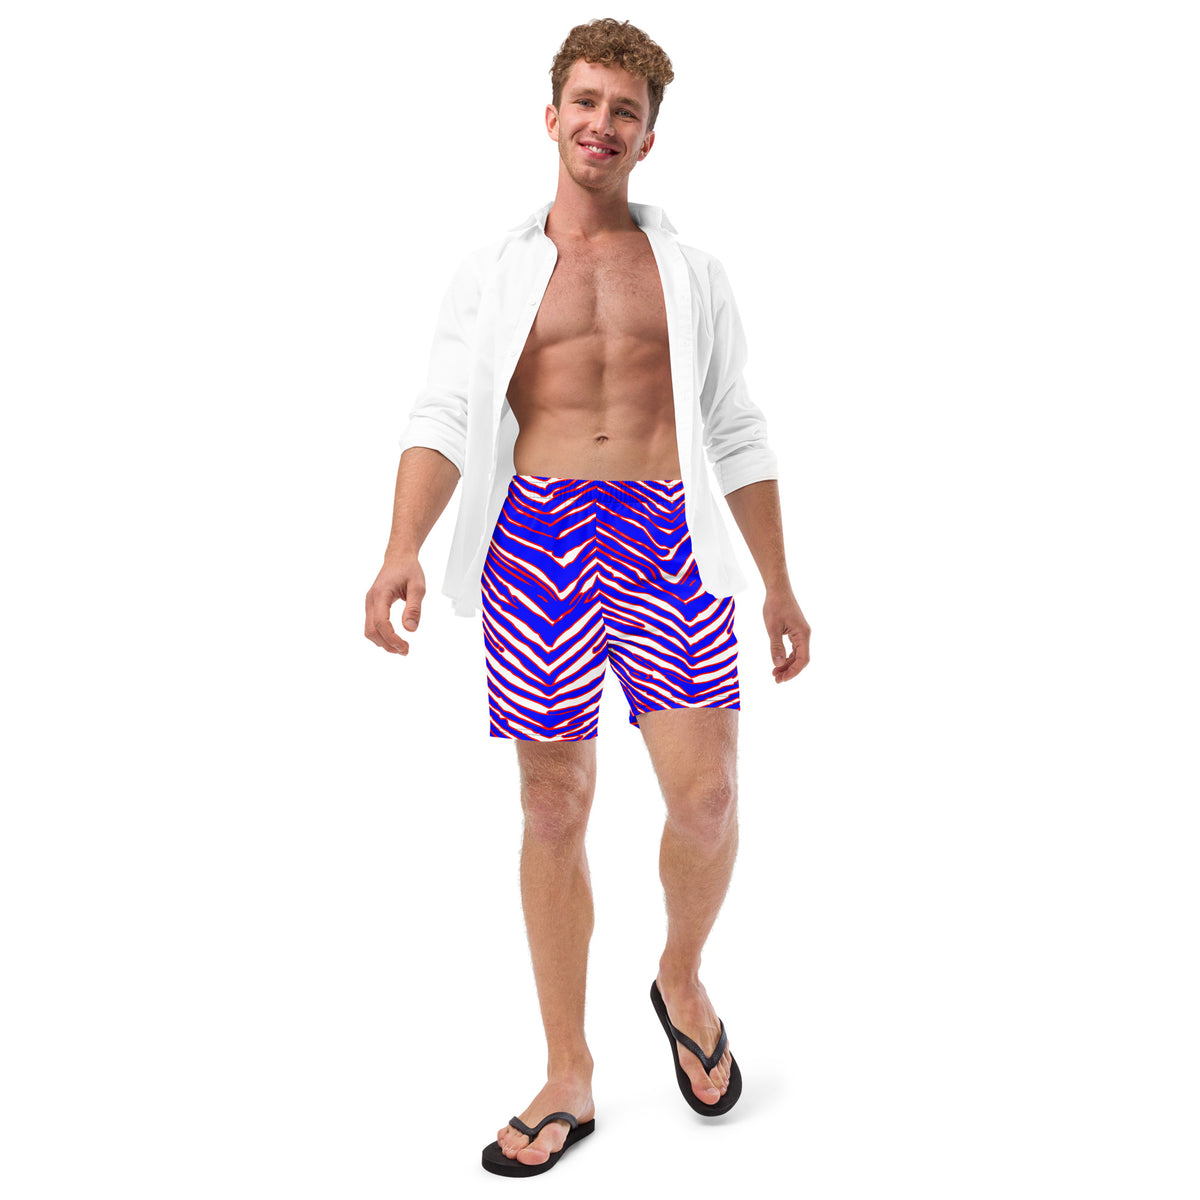 Front of Buffalo Zubas men's bathing suit paired with a white button down shirt and black flip flops.